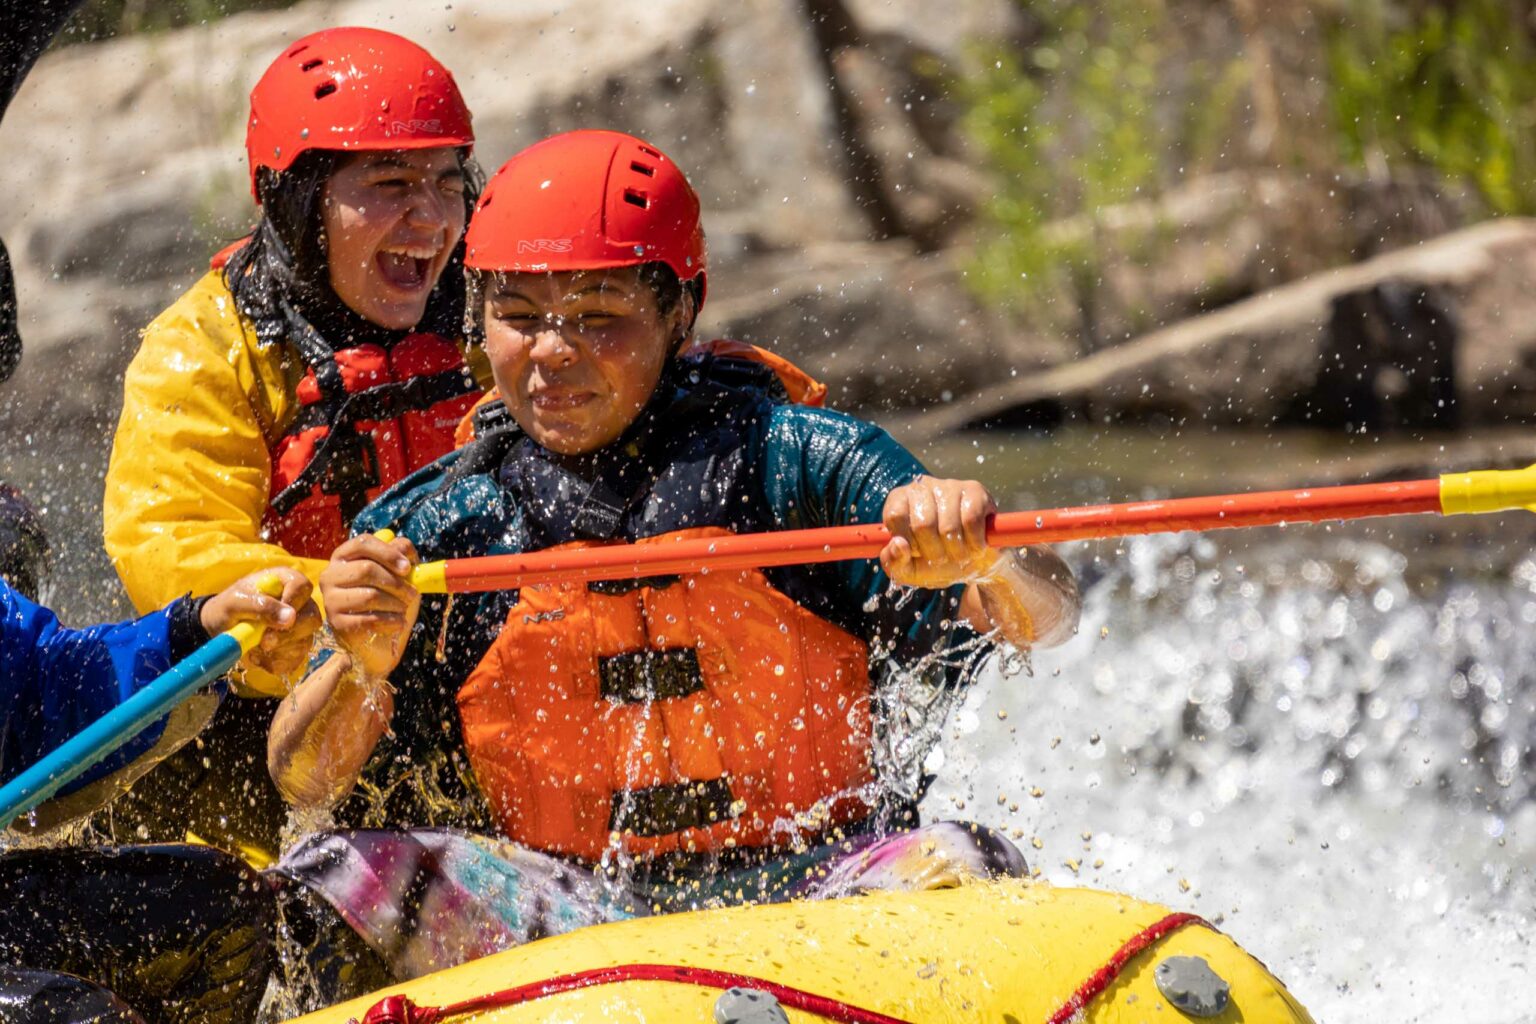 A group of people white water rafting at the Barking Dog Rapid.